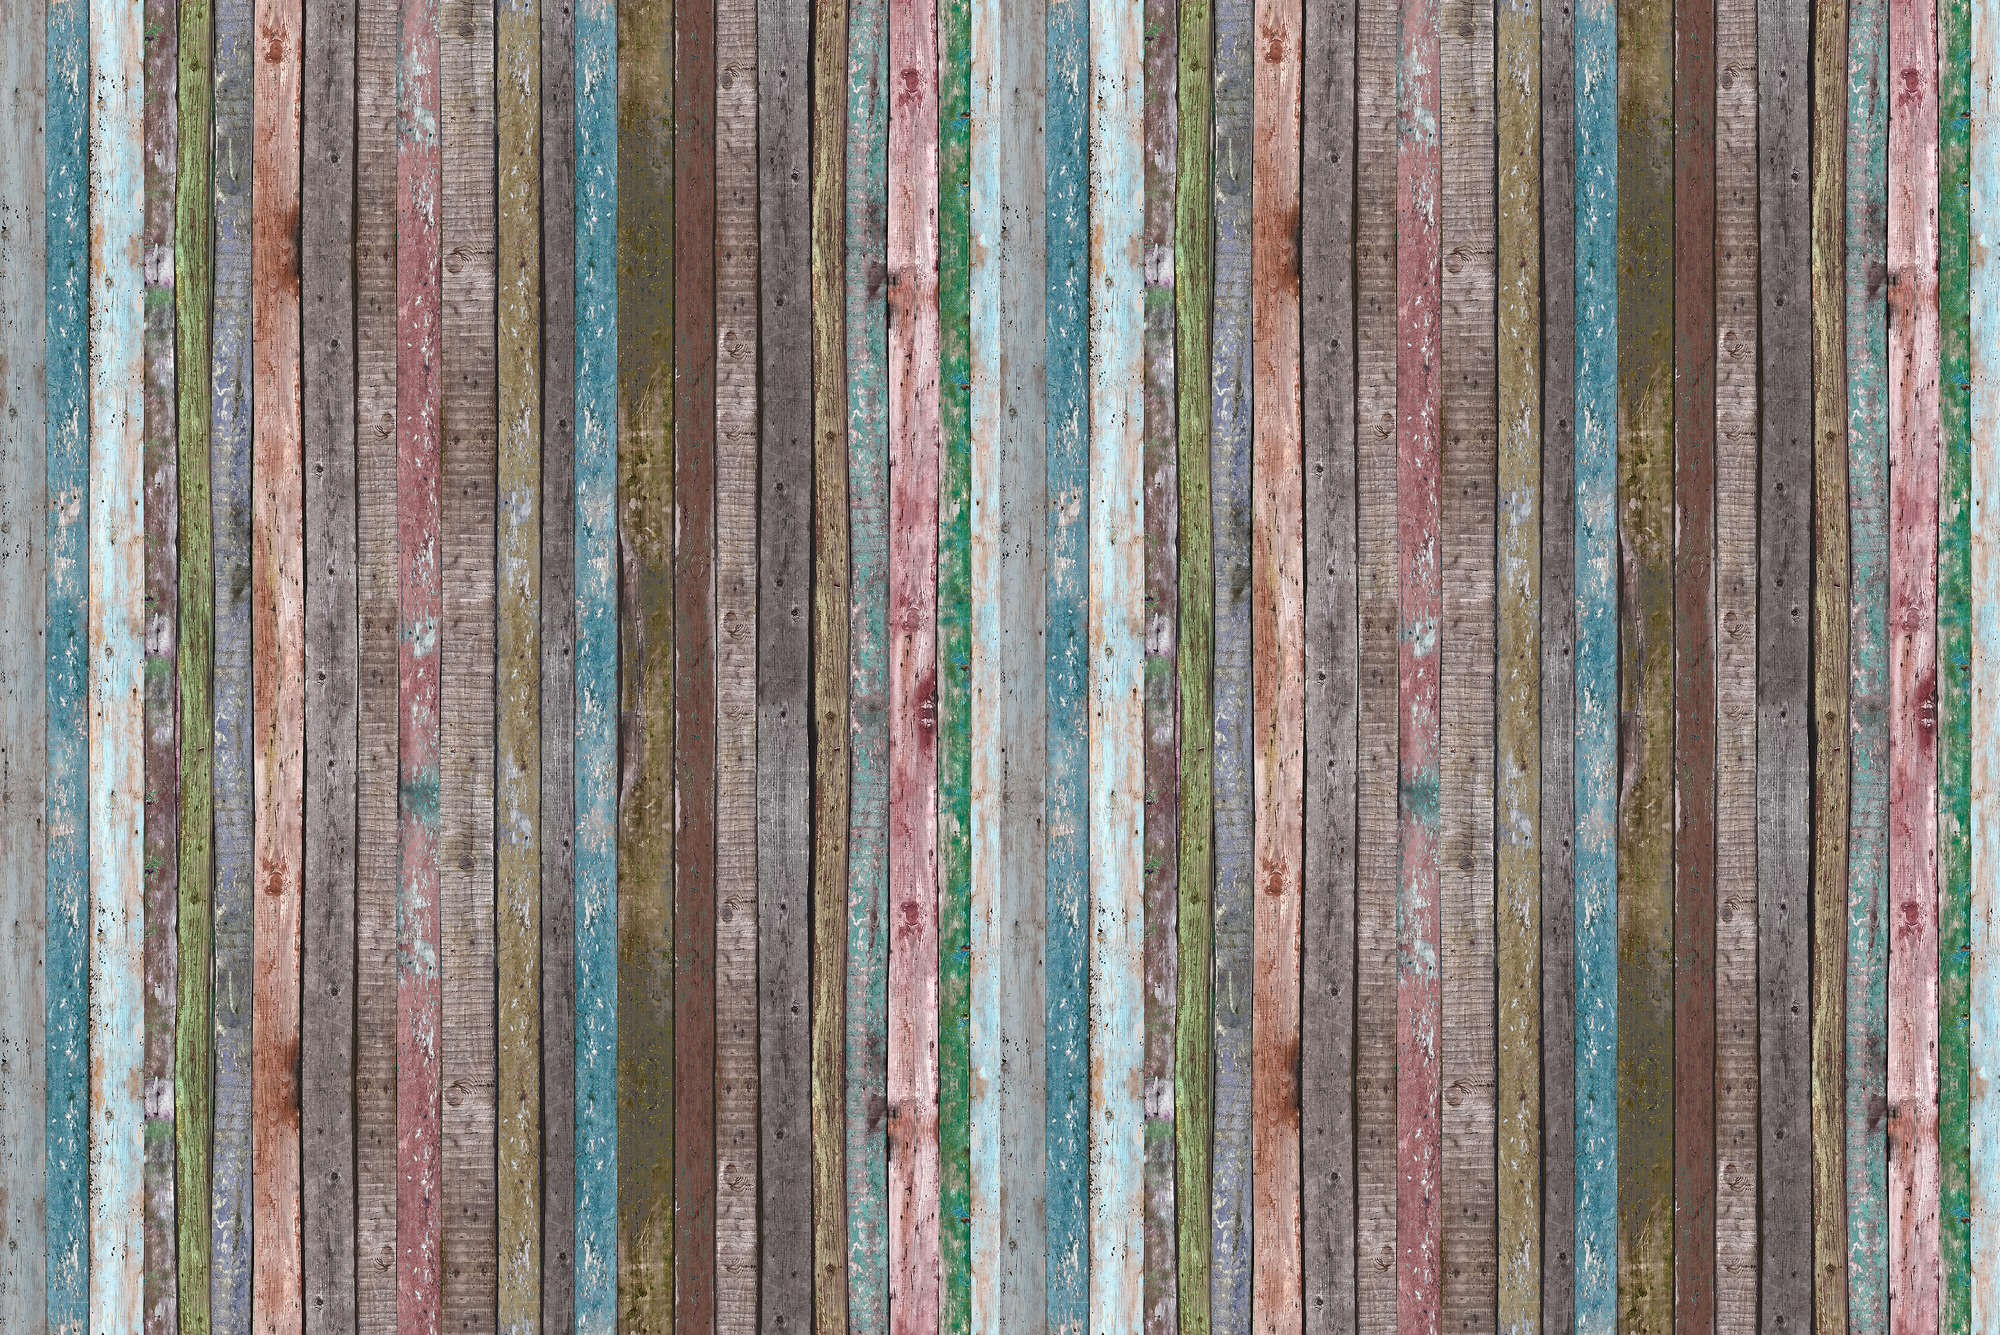             Wood mural fence of boards brown turquoise on matt smooth nonwoven
        